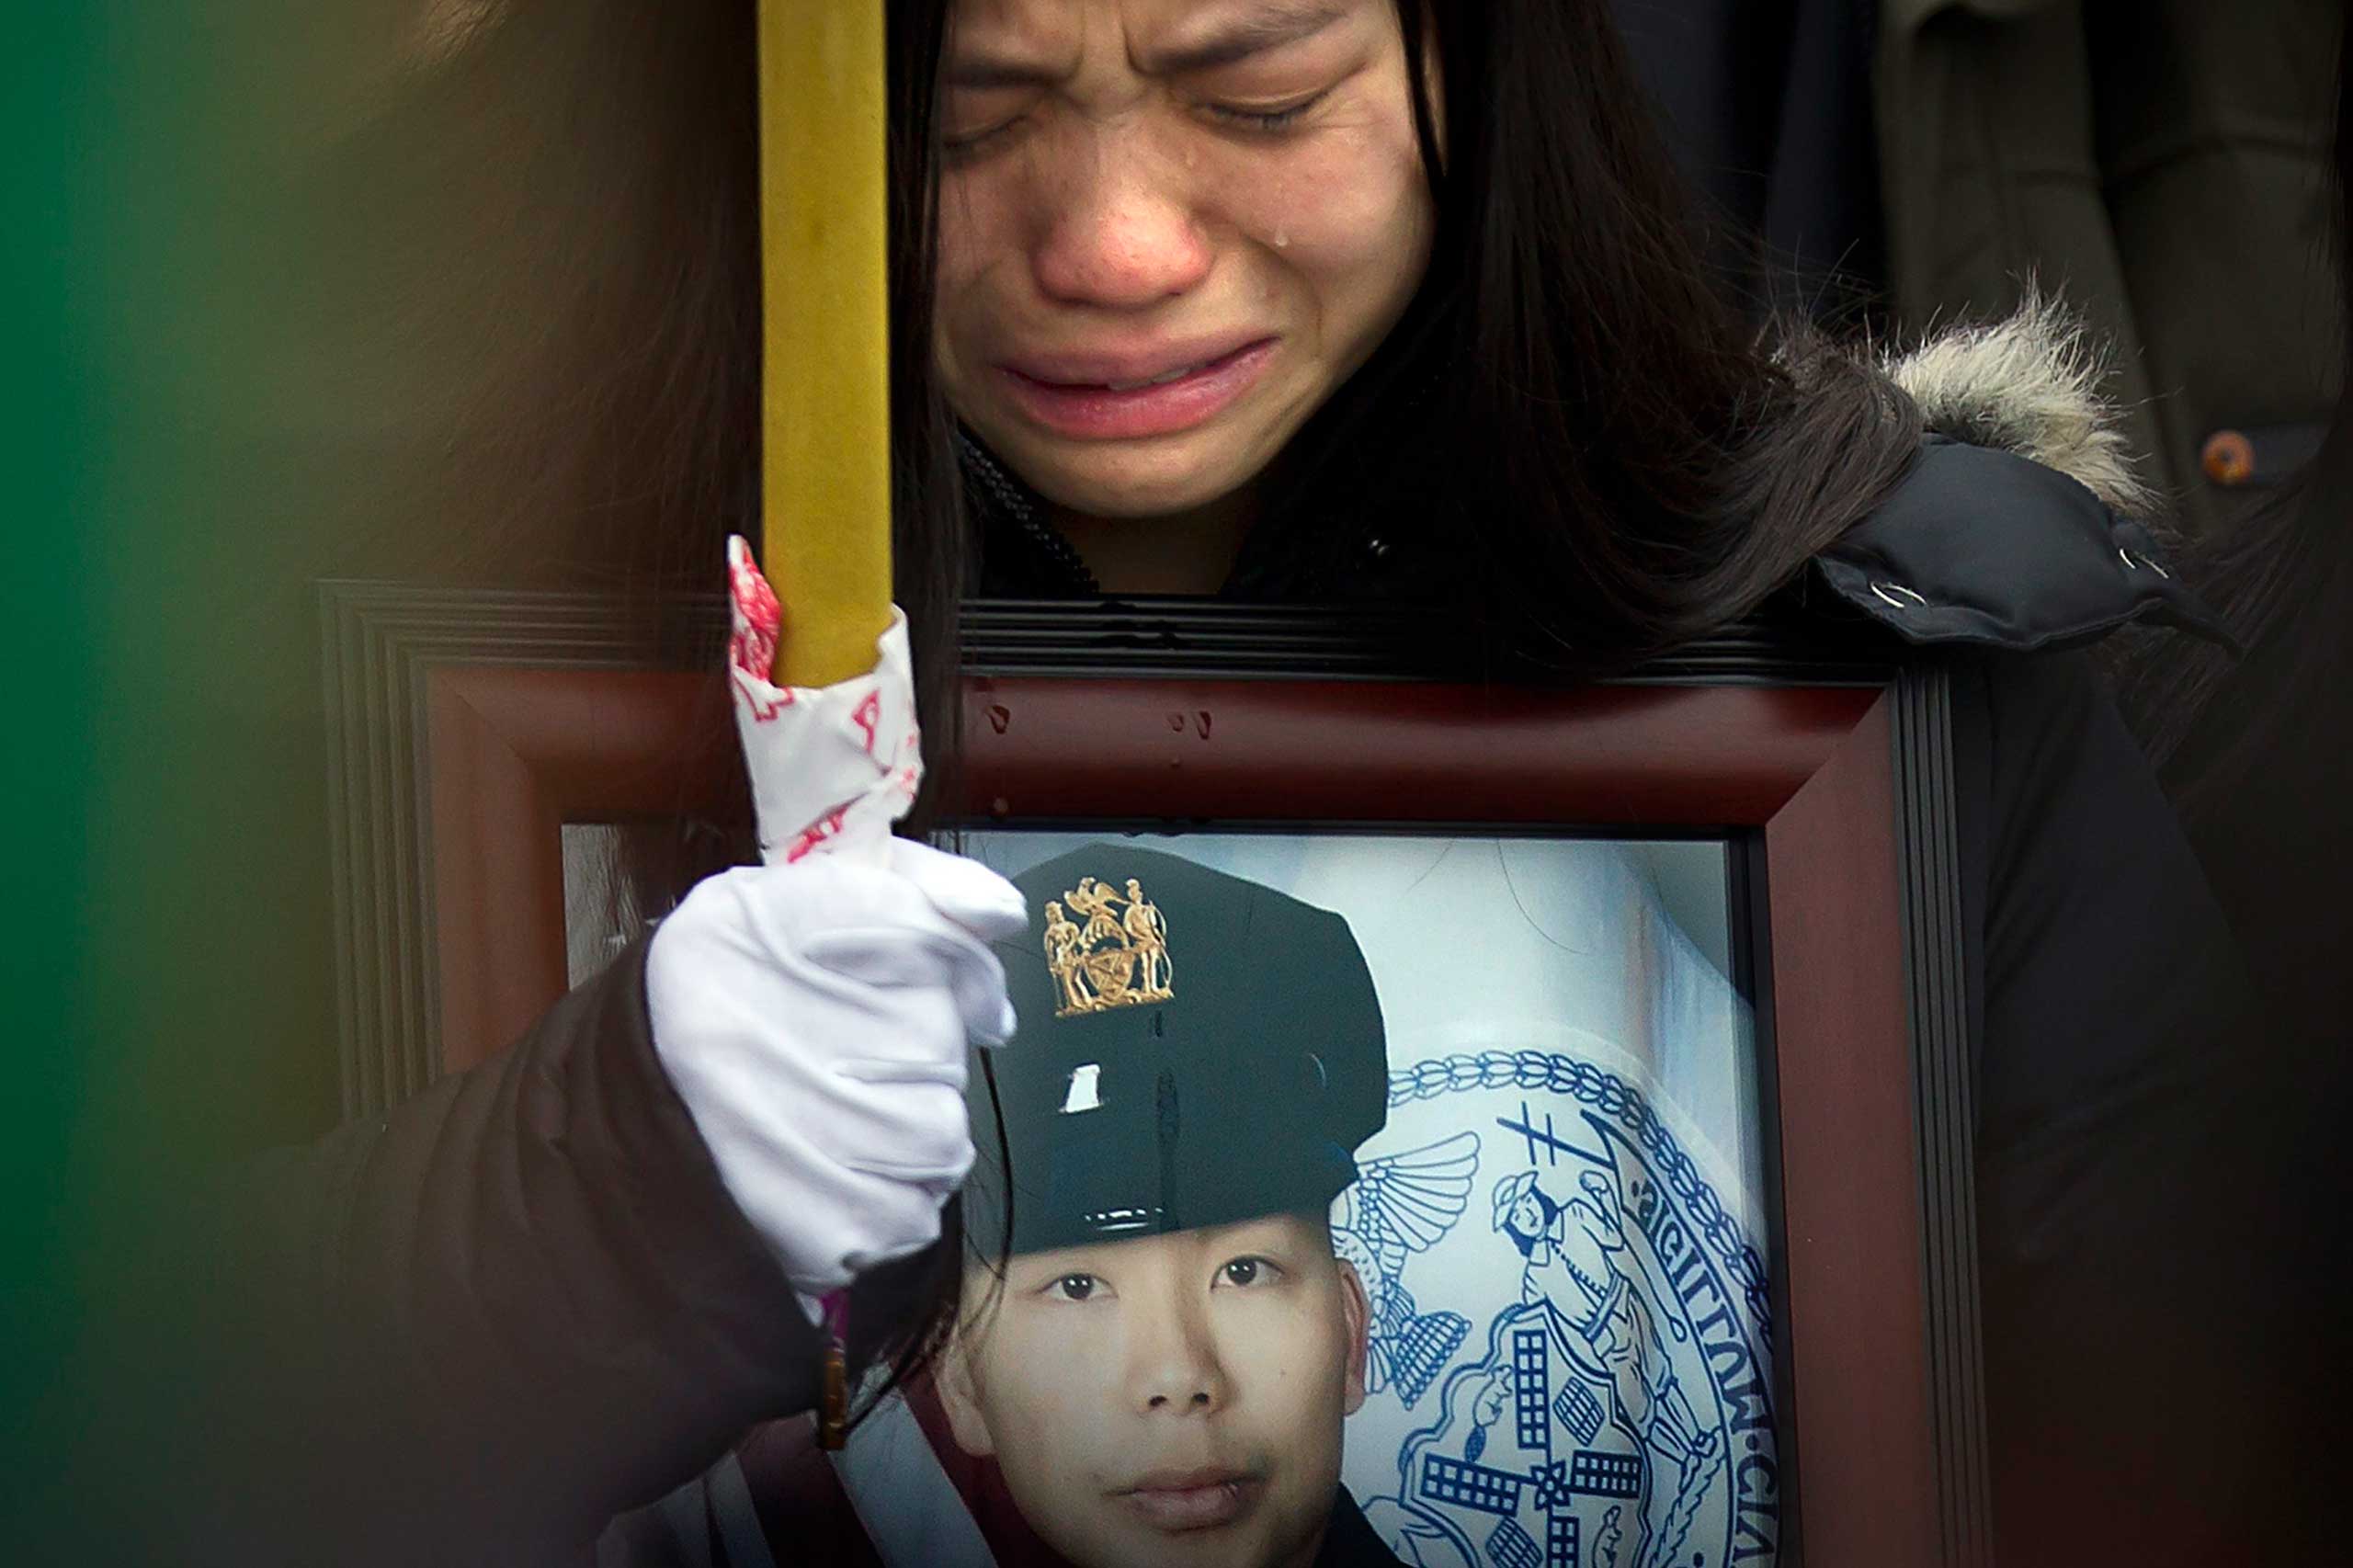 Jan. 4, 2015. Tears shed by widow Pei Xia Chen fall onto the frame of a portrait of her slain husband, New York Police Department officer Wenjian Liu, as his casket departs his funeral in New York.